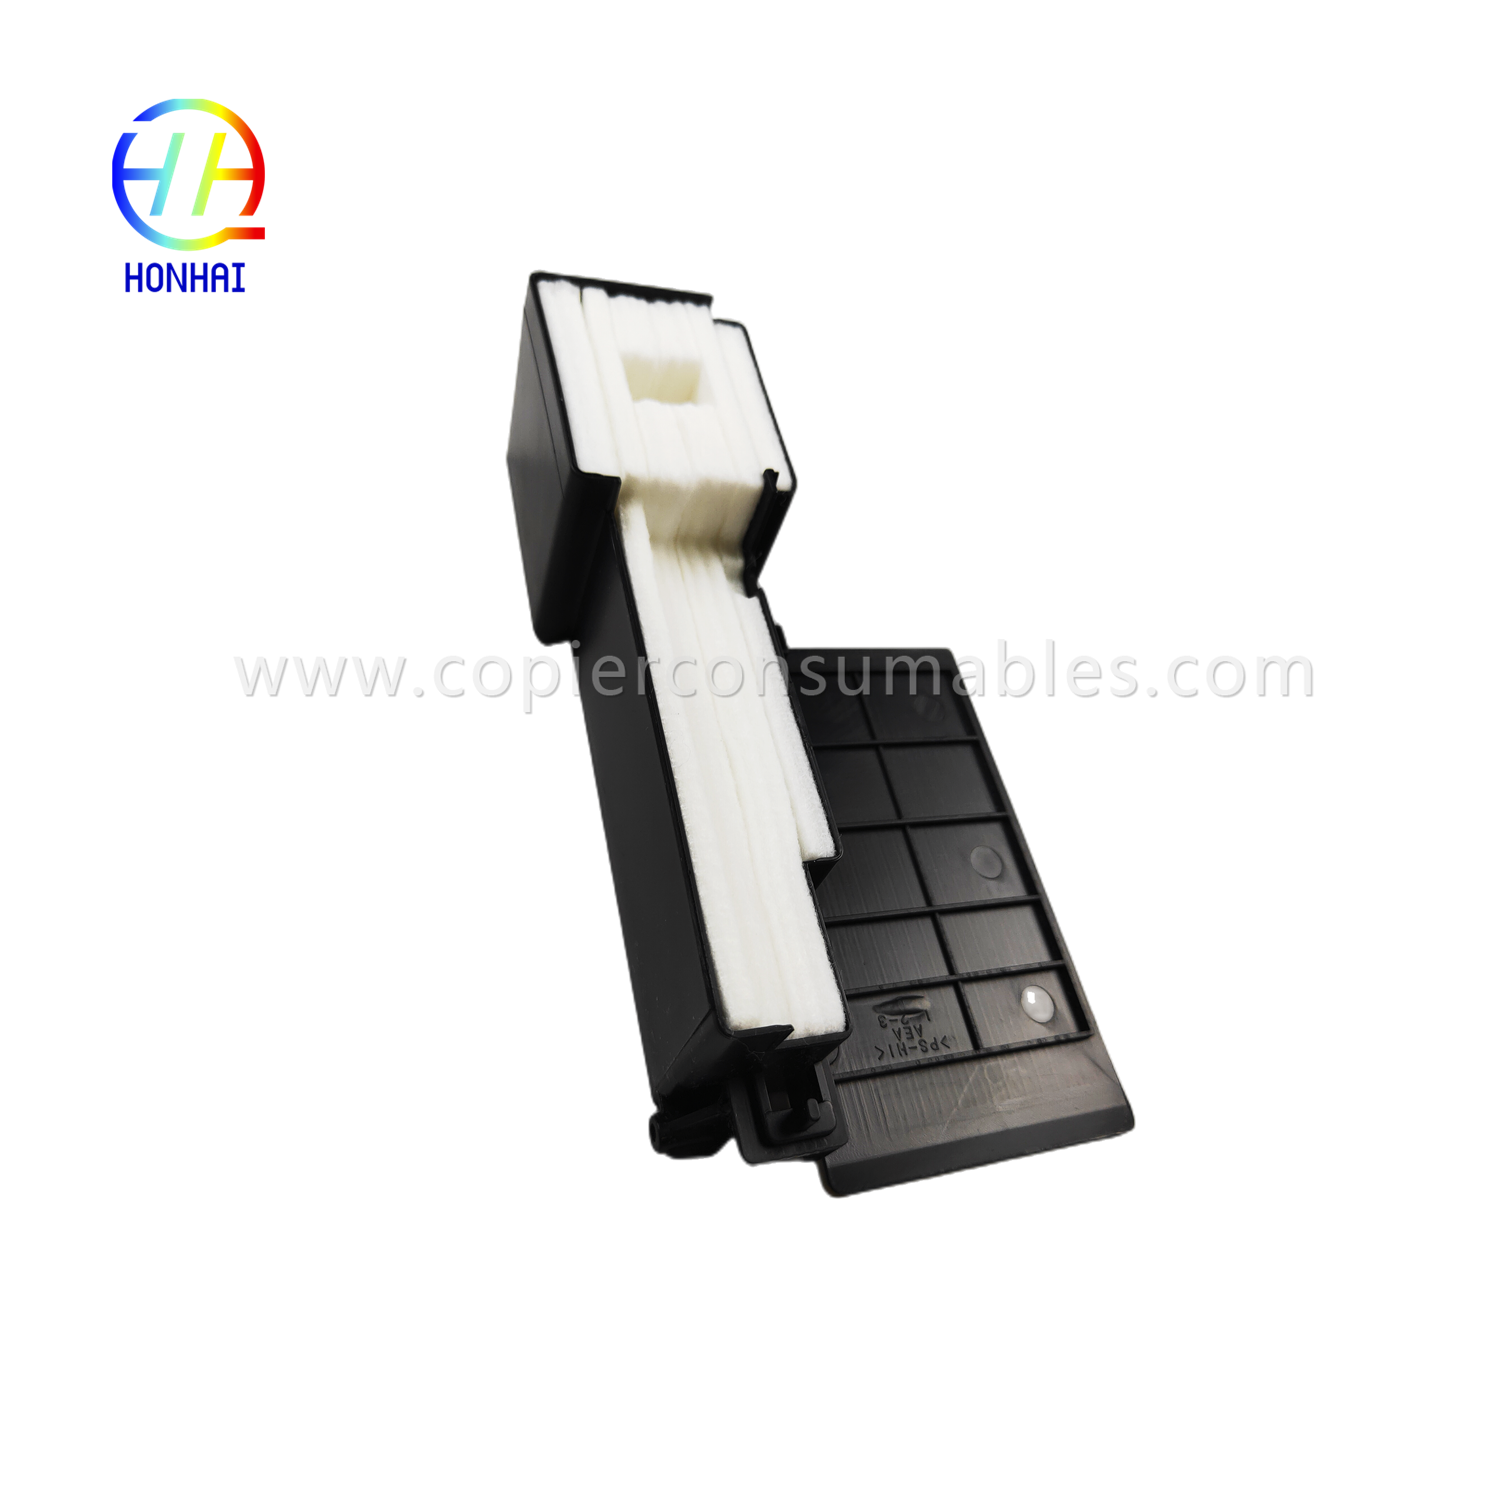 https://www.copierconsumables.com/waste-inktpad-pack-forl220-l360-l380-printer-product/